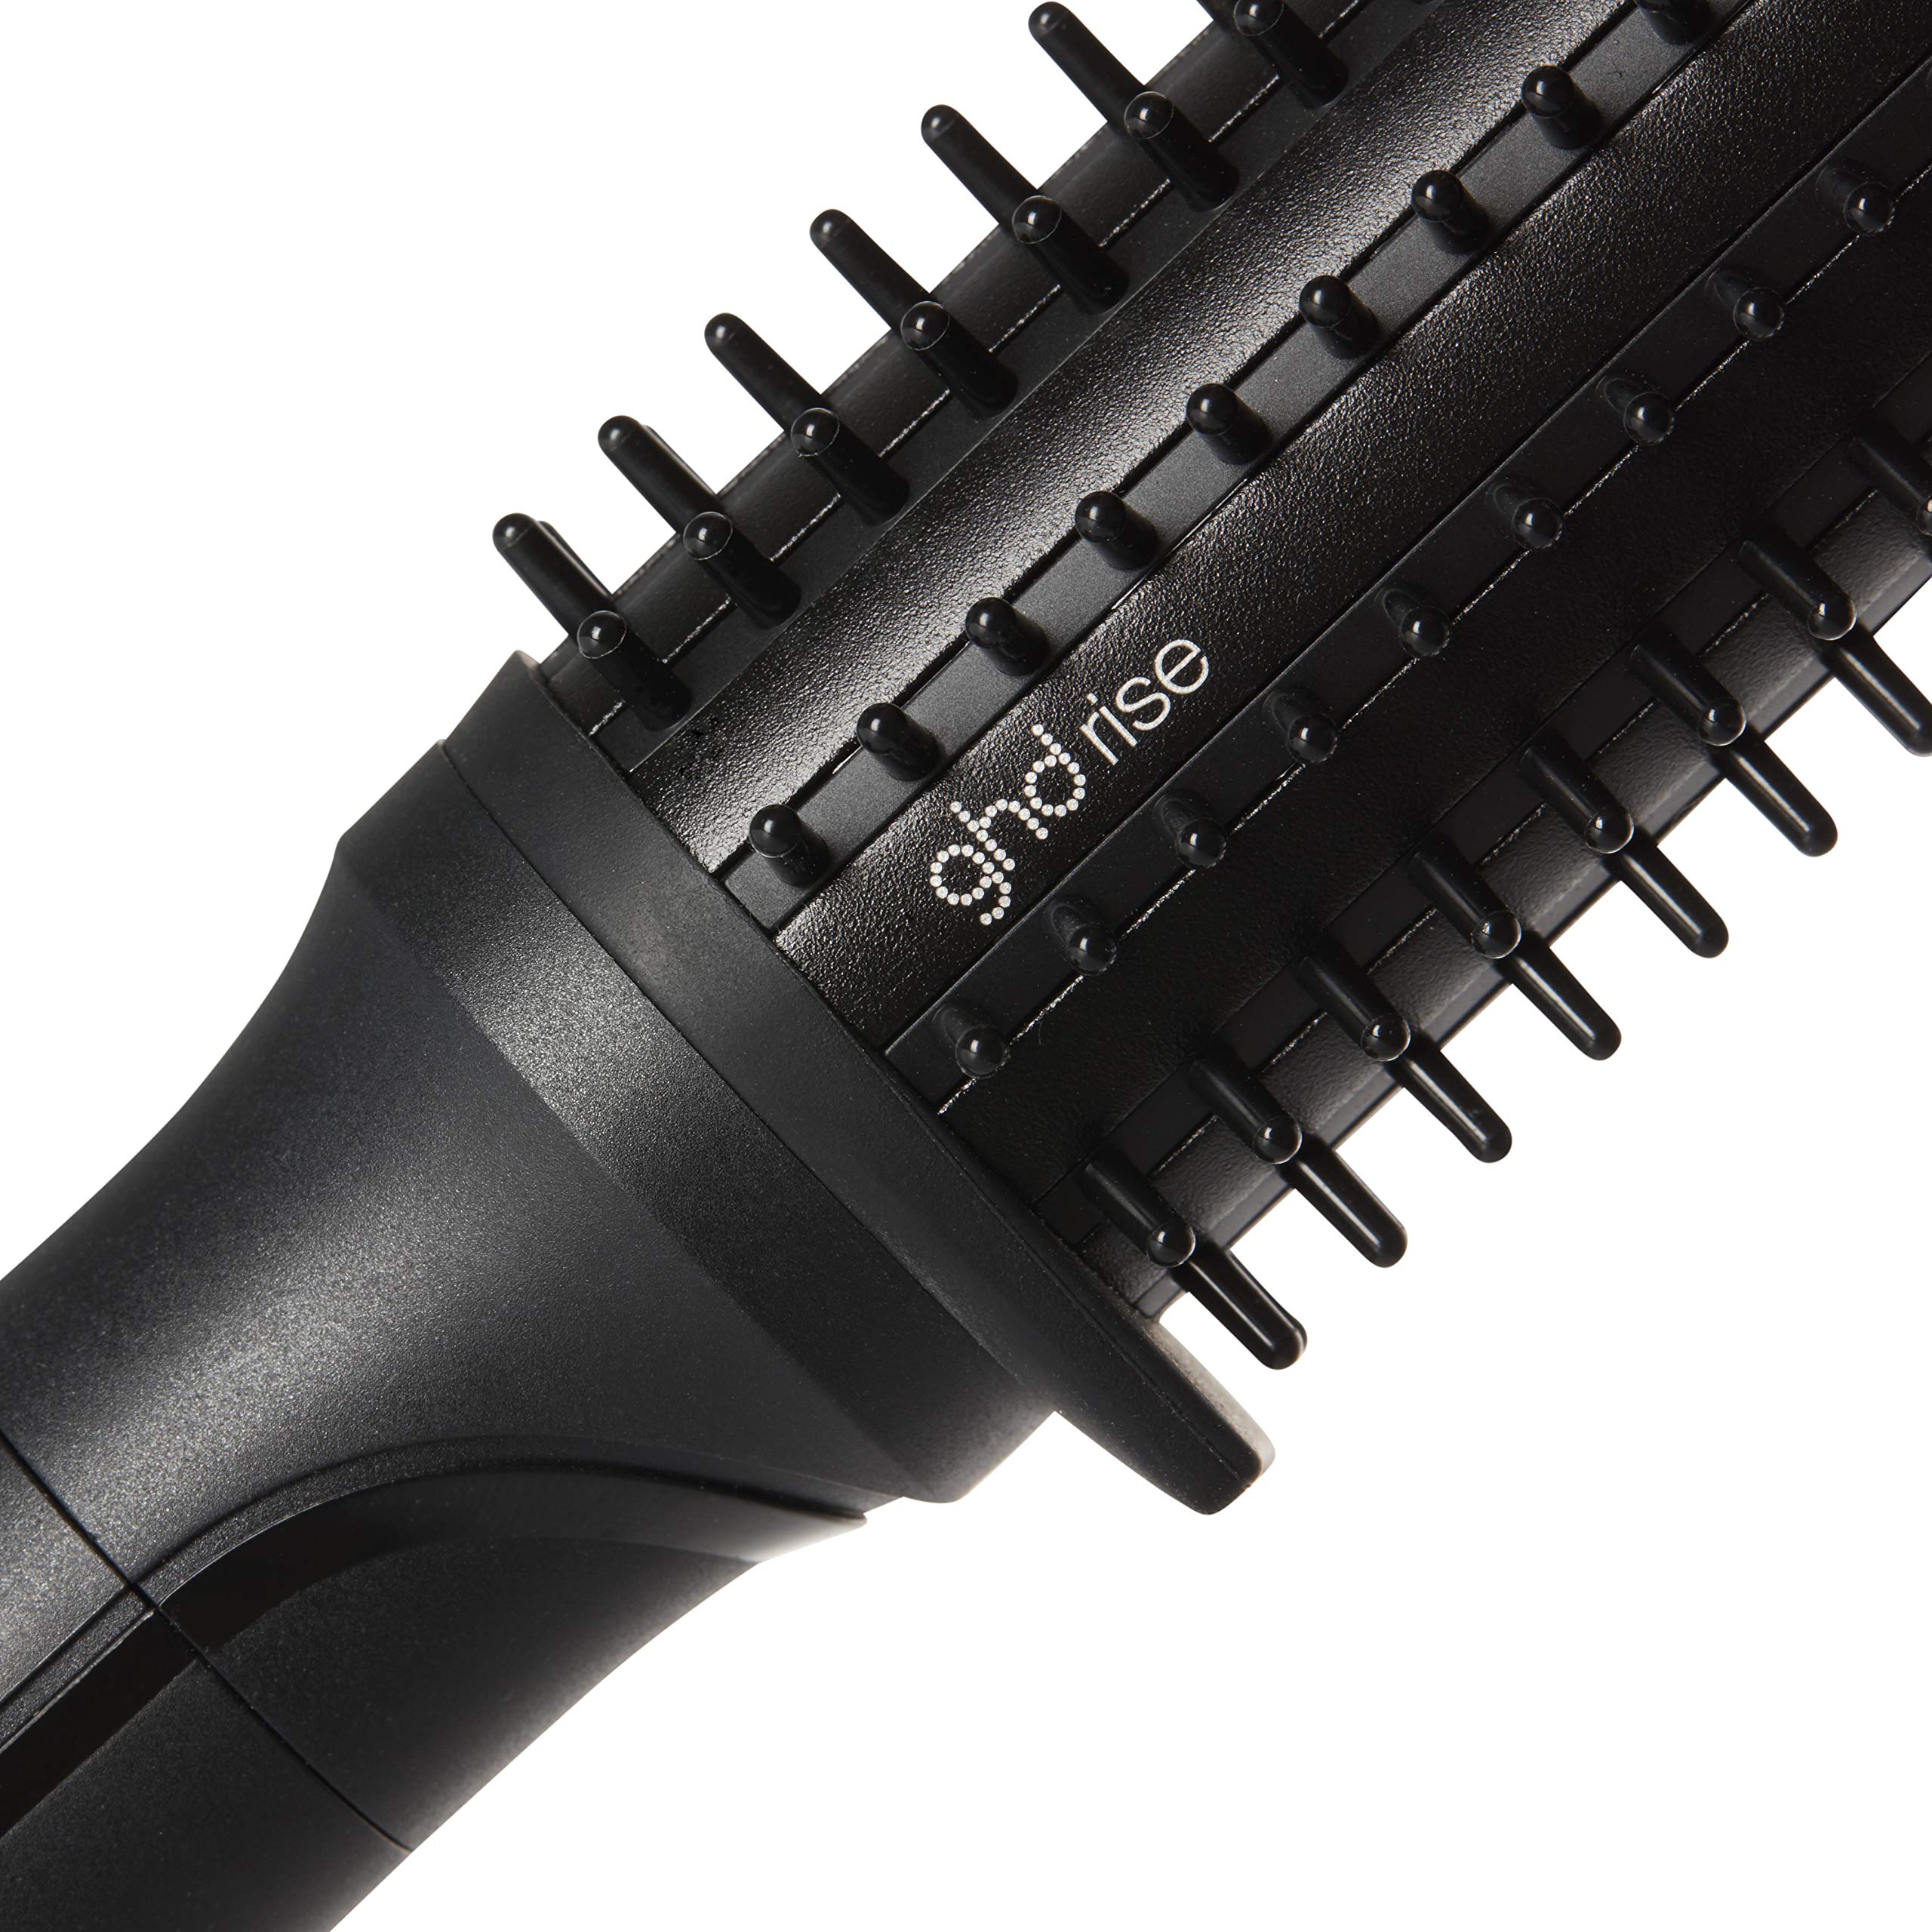 ghd Rise Hot Air Hair Brush ― Professional Volumizing Blow Dryer Curling Brush to Dry Hair for Maximum Lift with Safer-for-Hair Optimum Styling Temperature